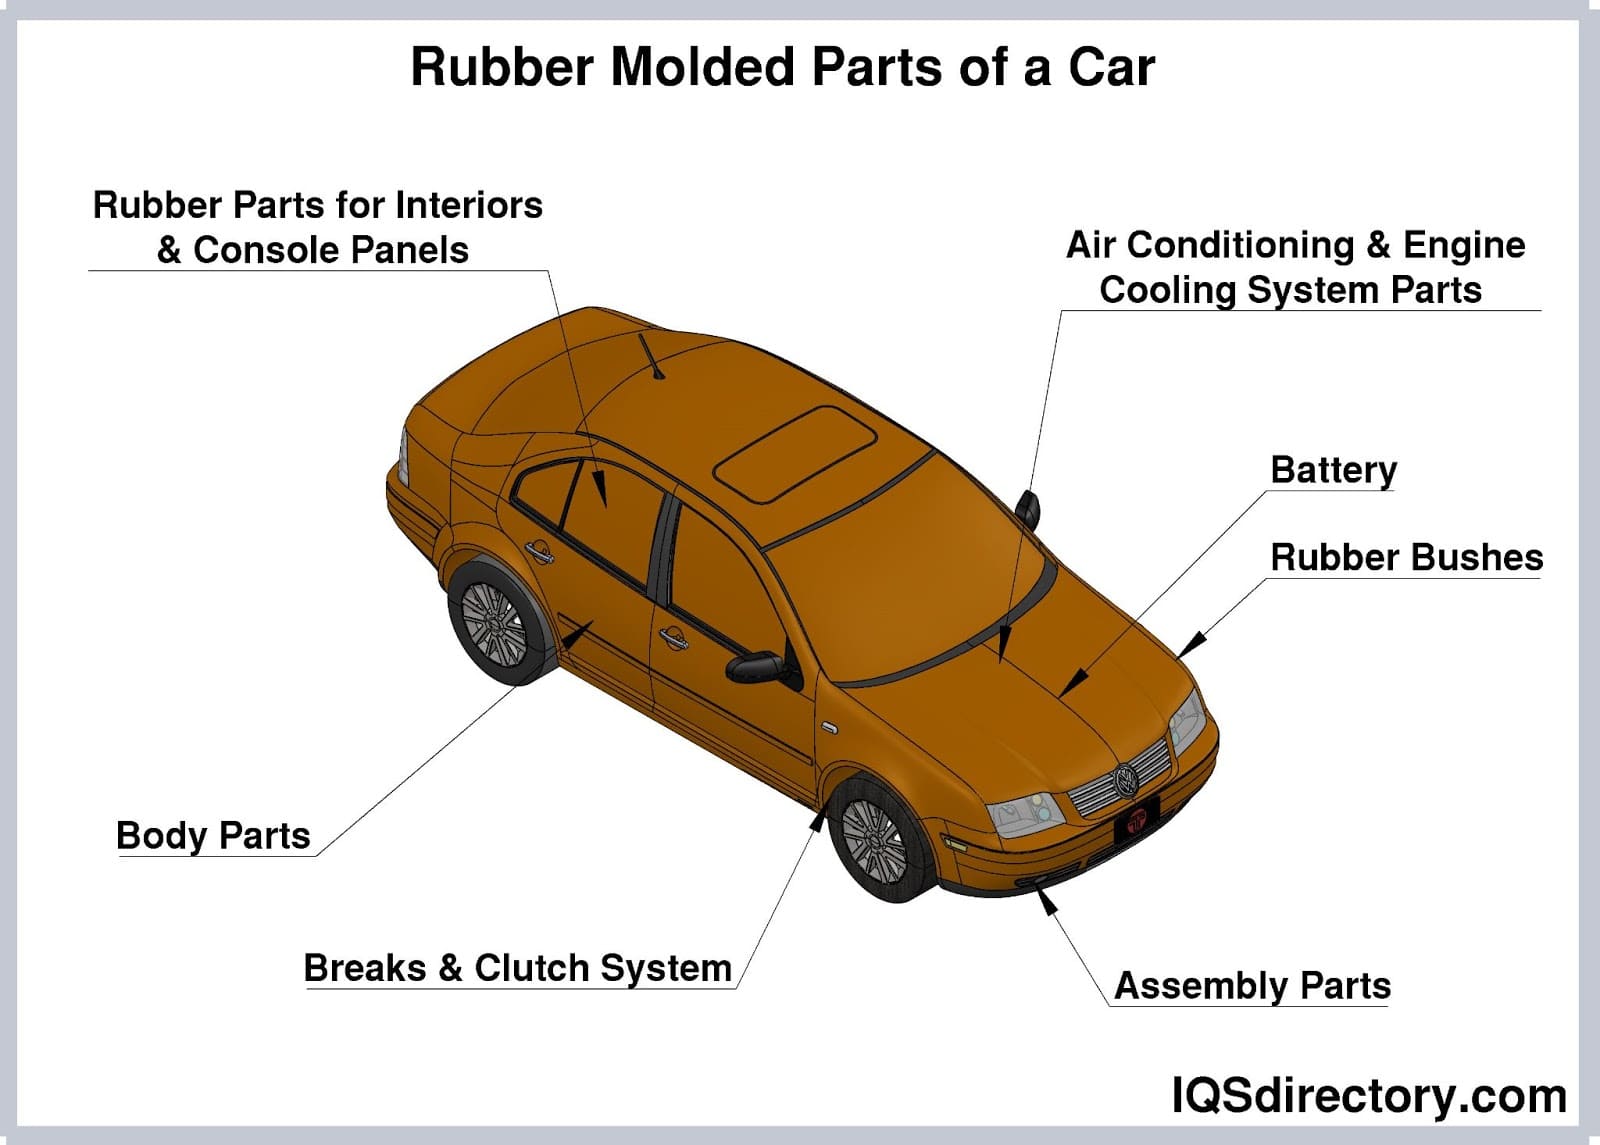 https://www.iqsdirectory.com/articles/rubber/rubber-molding/rubber-molded-parts-of-a-car.jpg